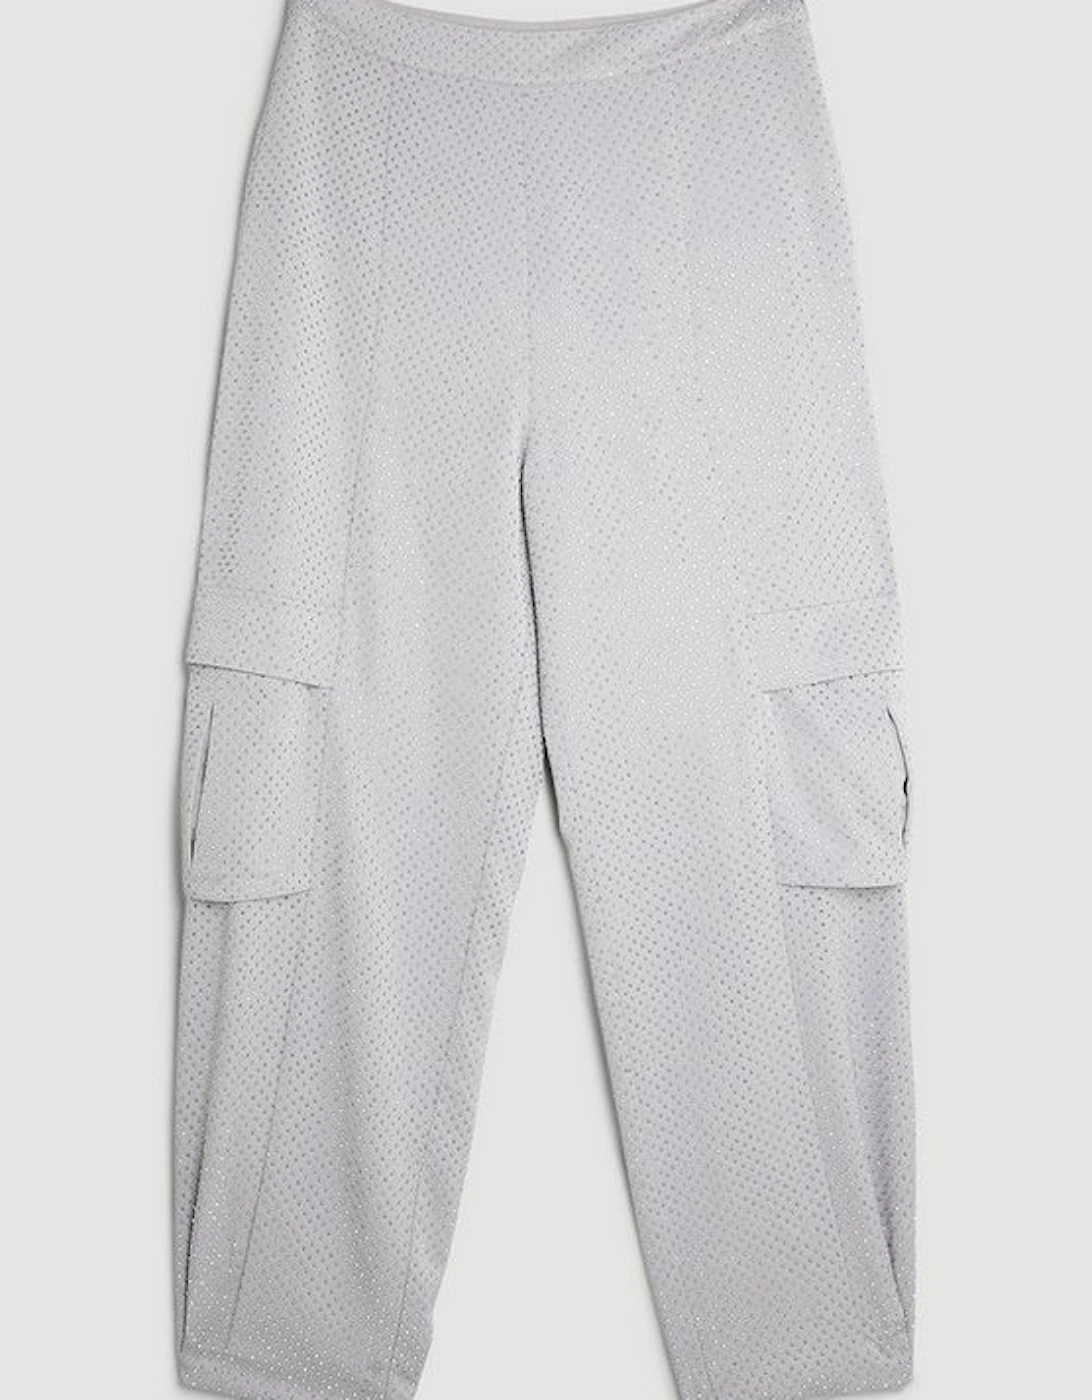 Satin Embellished Woven Cargo Trouser